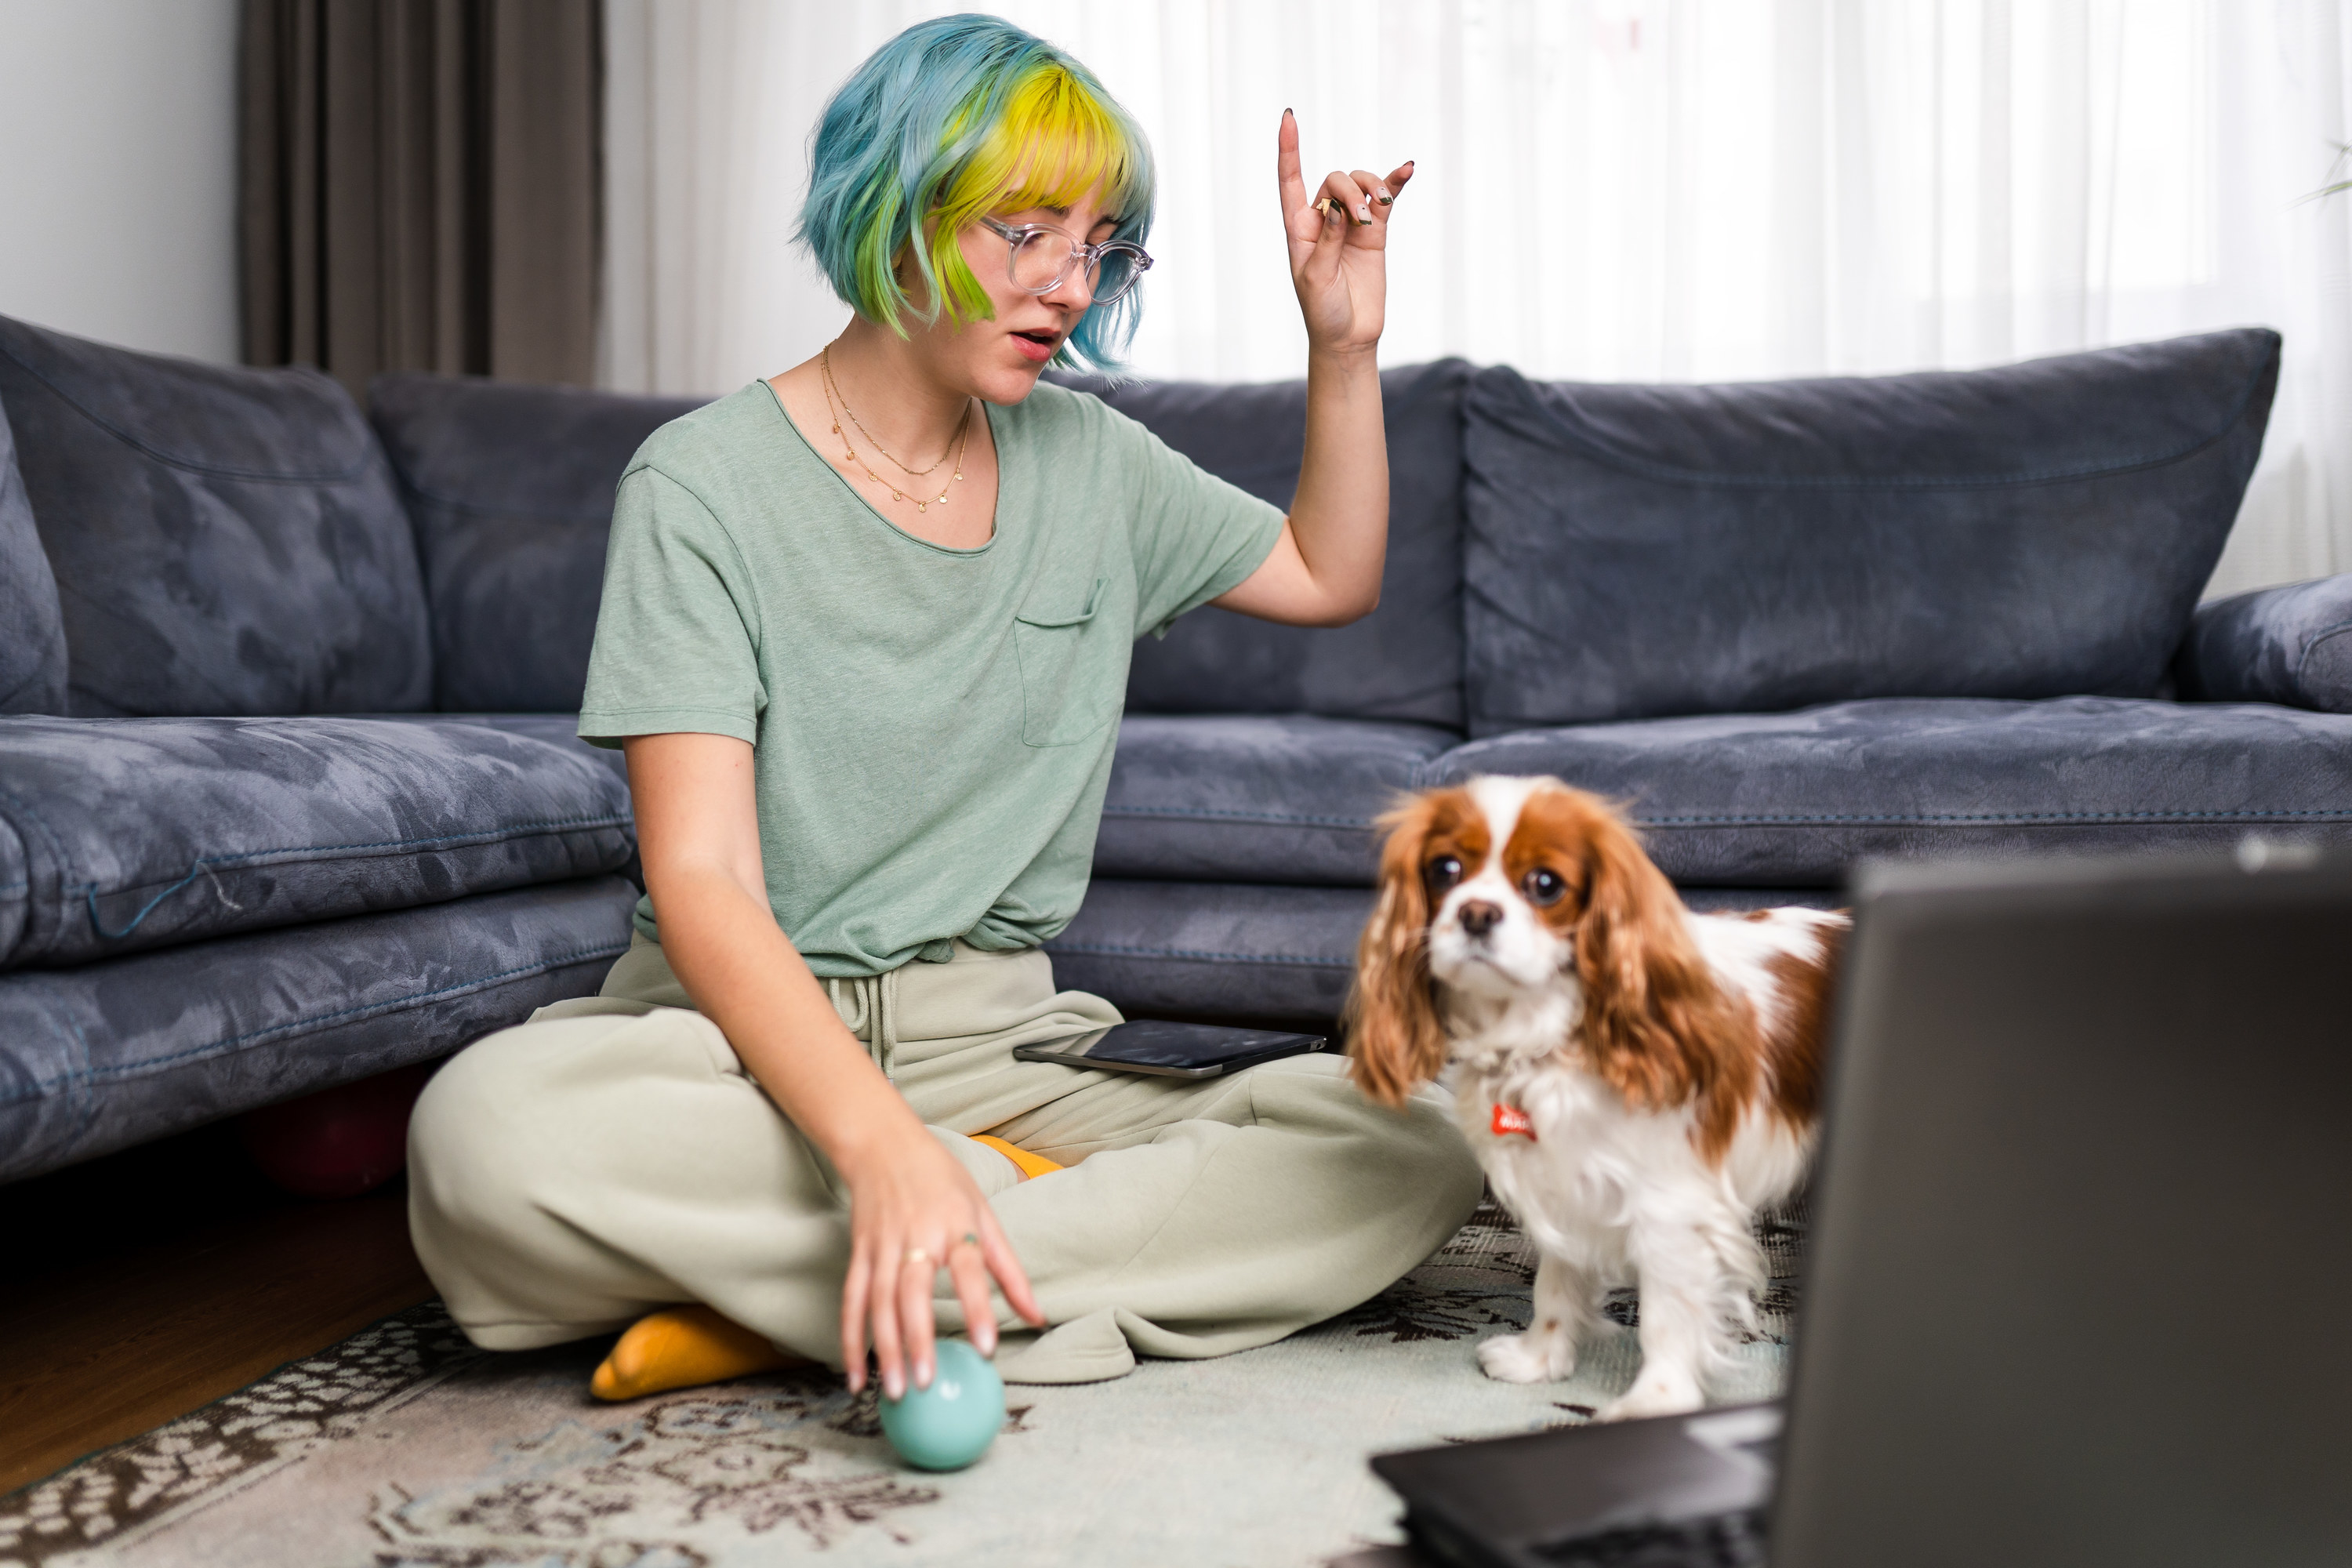 A person with blue and yellow hair uses videos on her computer to help train her small dog